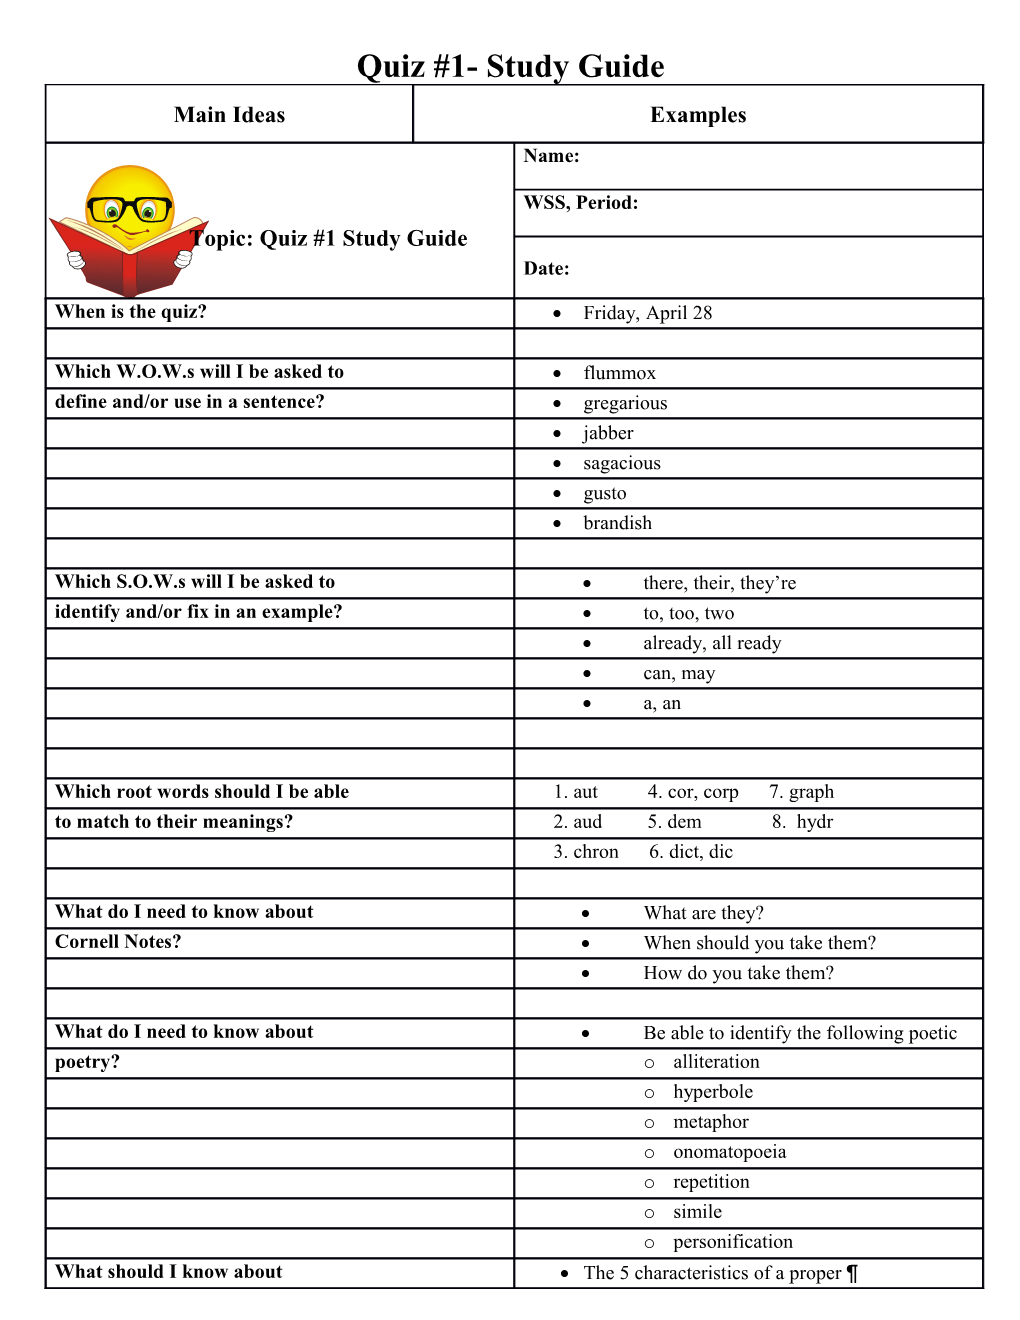 Cornell Notes Template s1